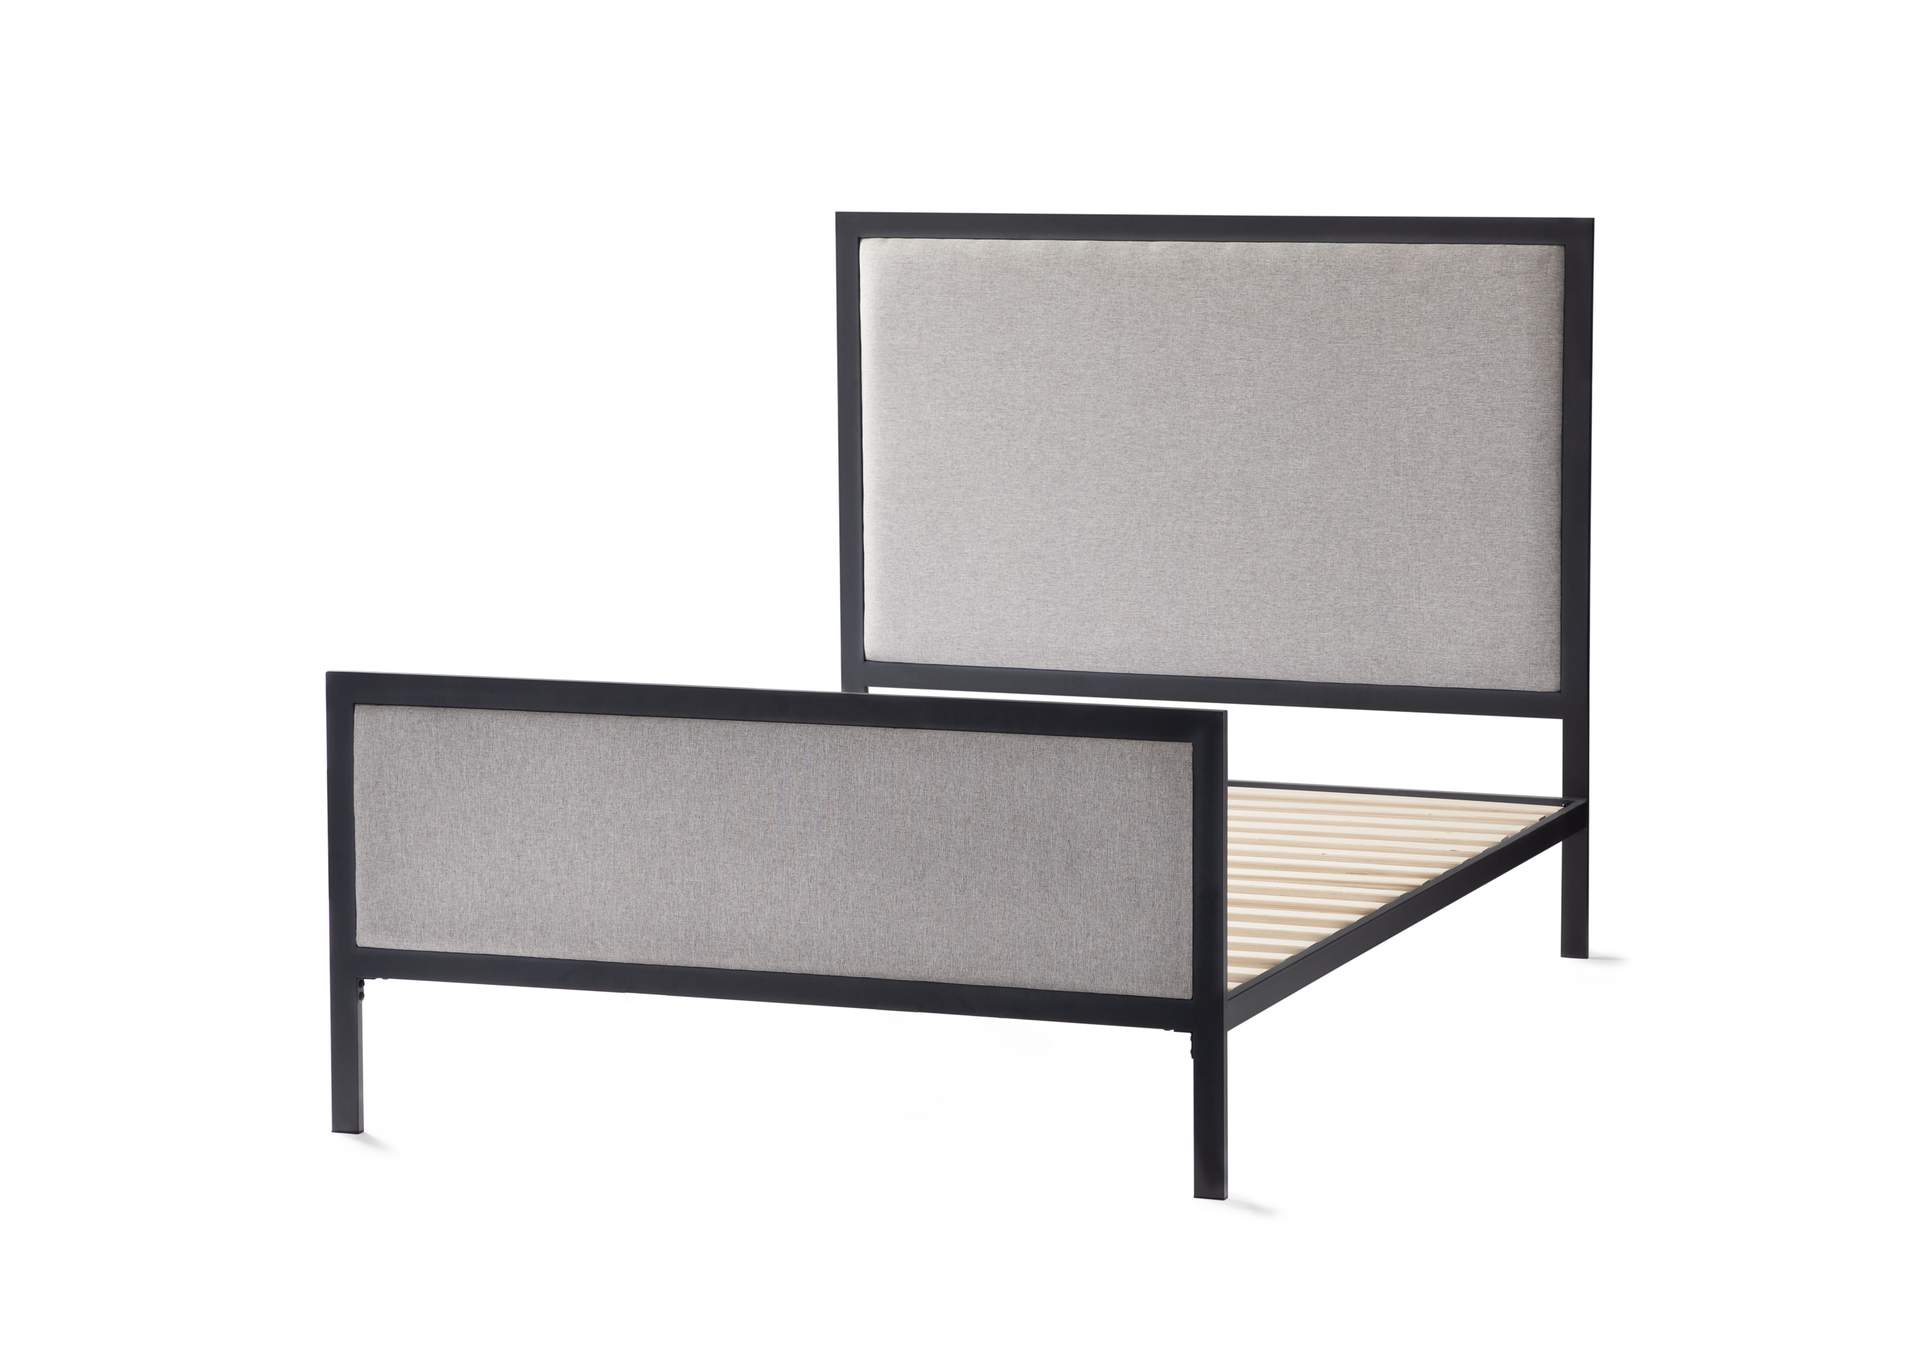 Malouf Charcoal Clarke Metal Upholstered Queen Bed,Malouf